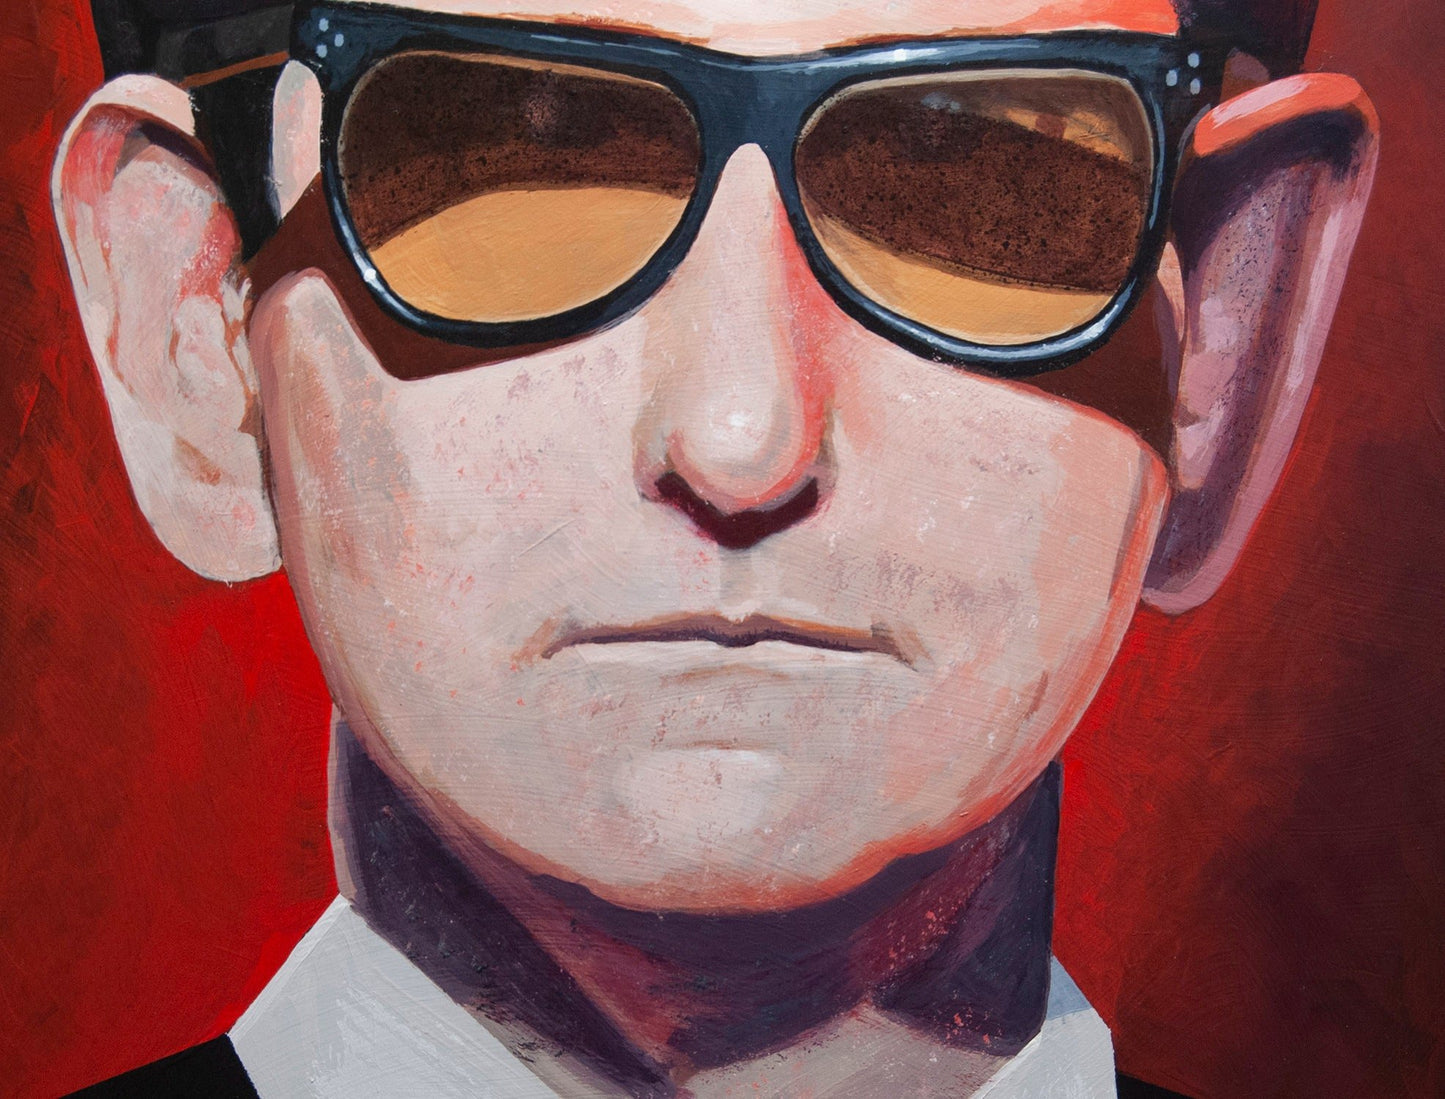 Roy Orbison painting